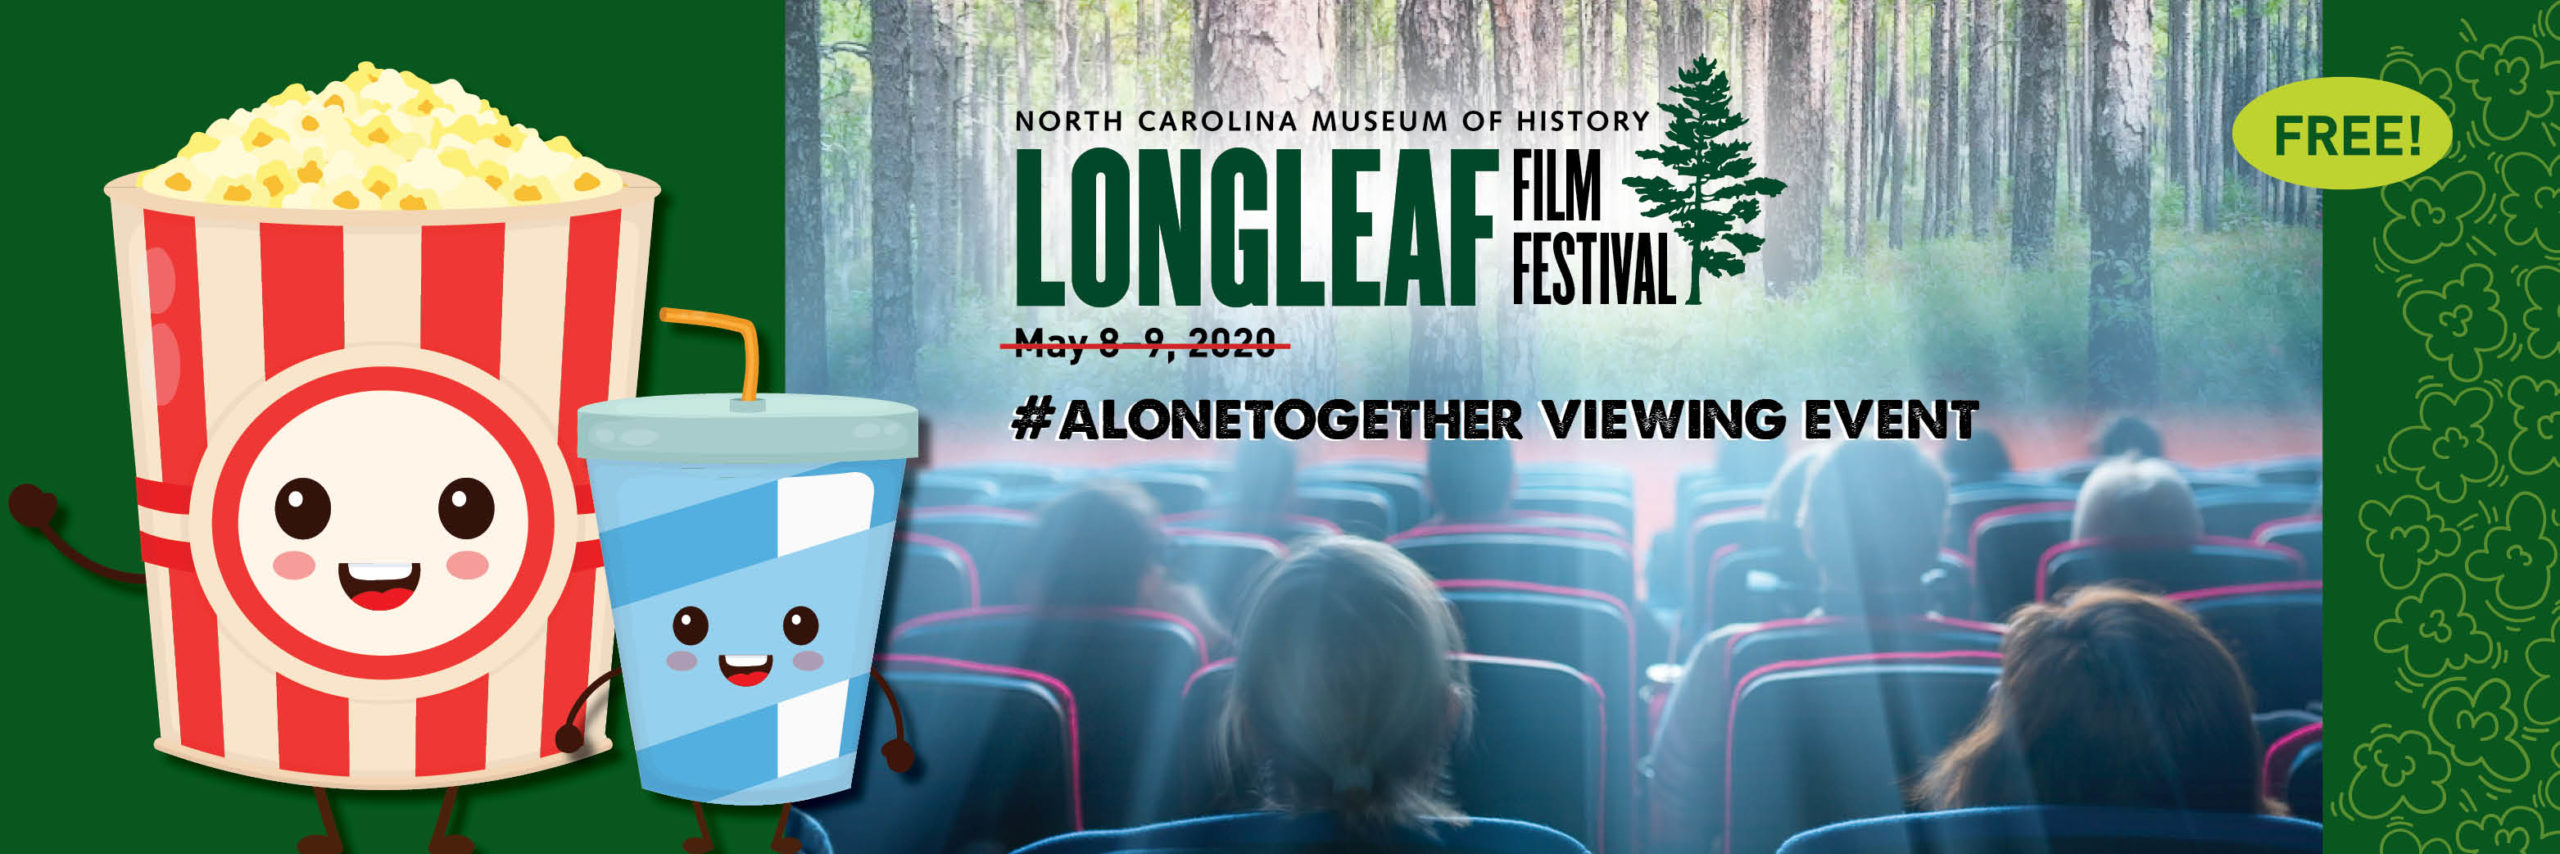 Longleaf Film Festival is sponsored by the North Carolina Museum of History.